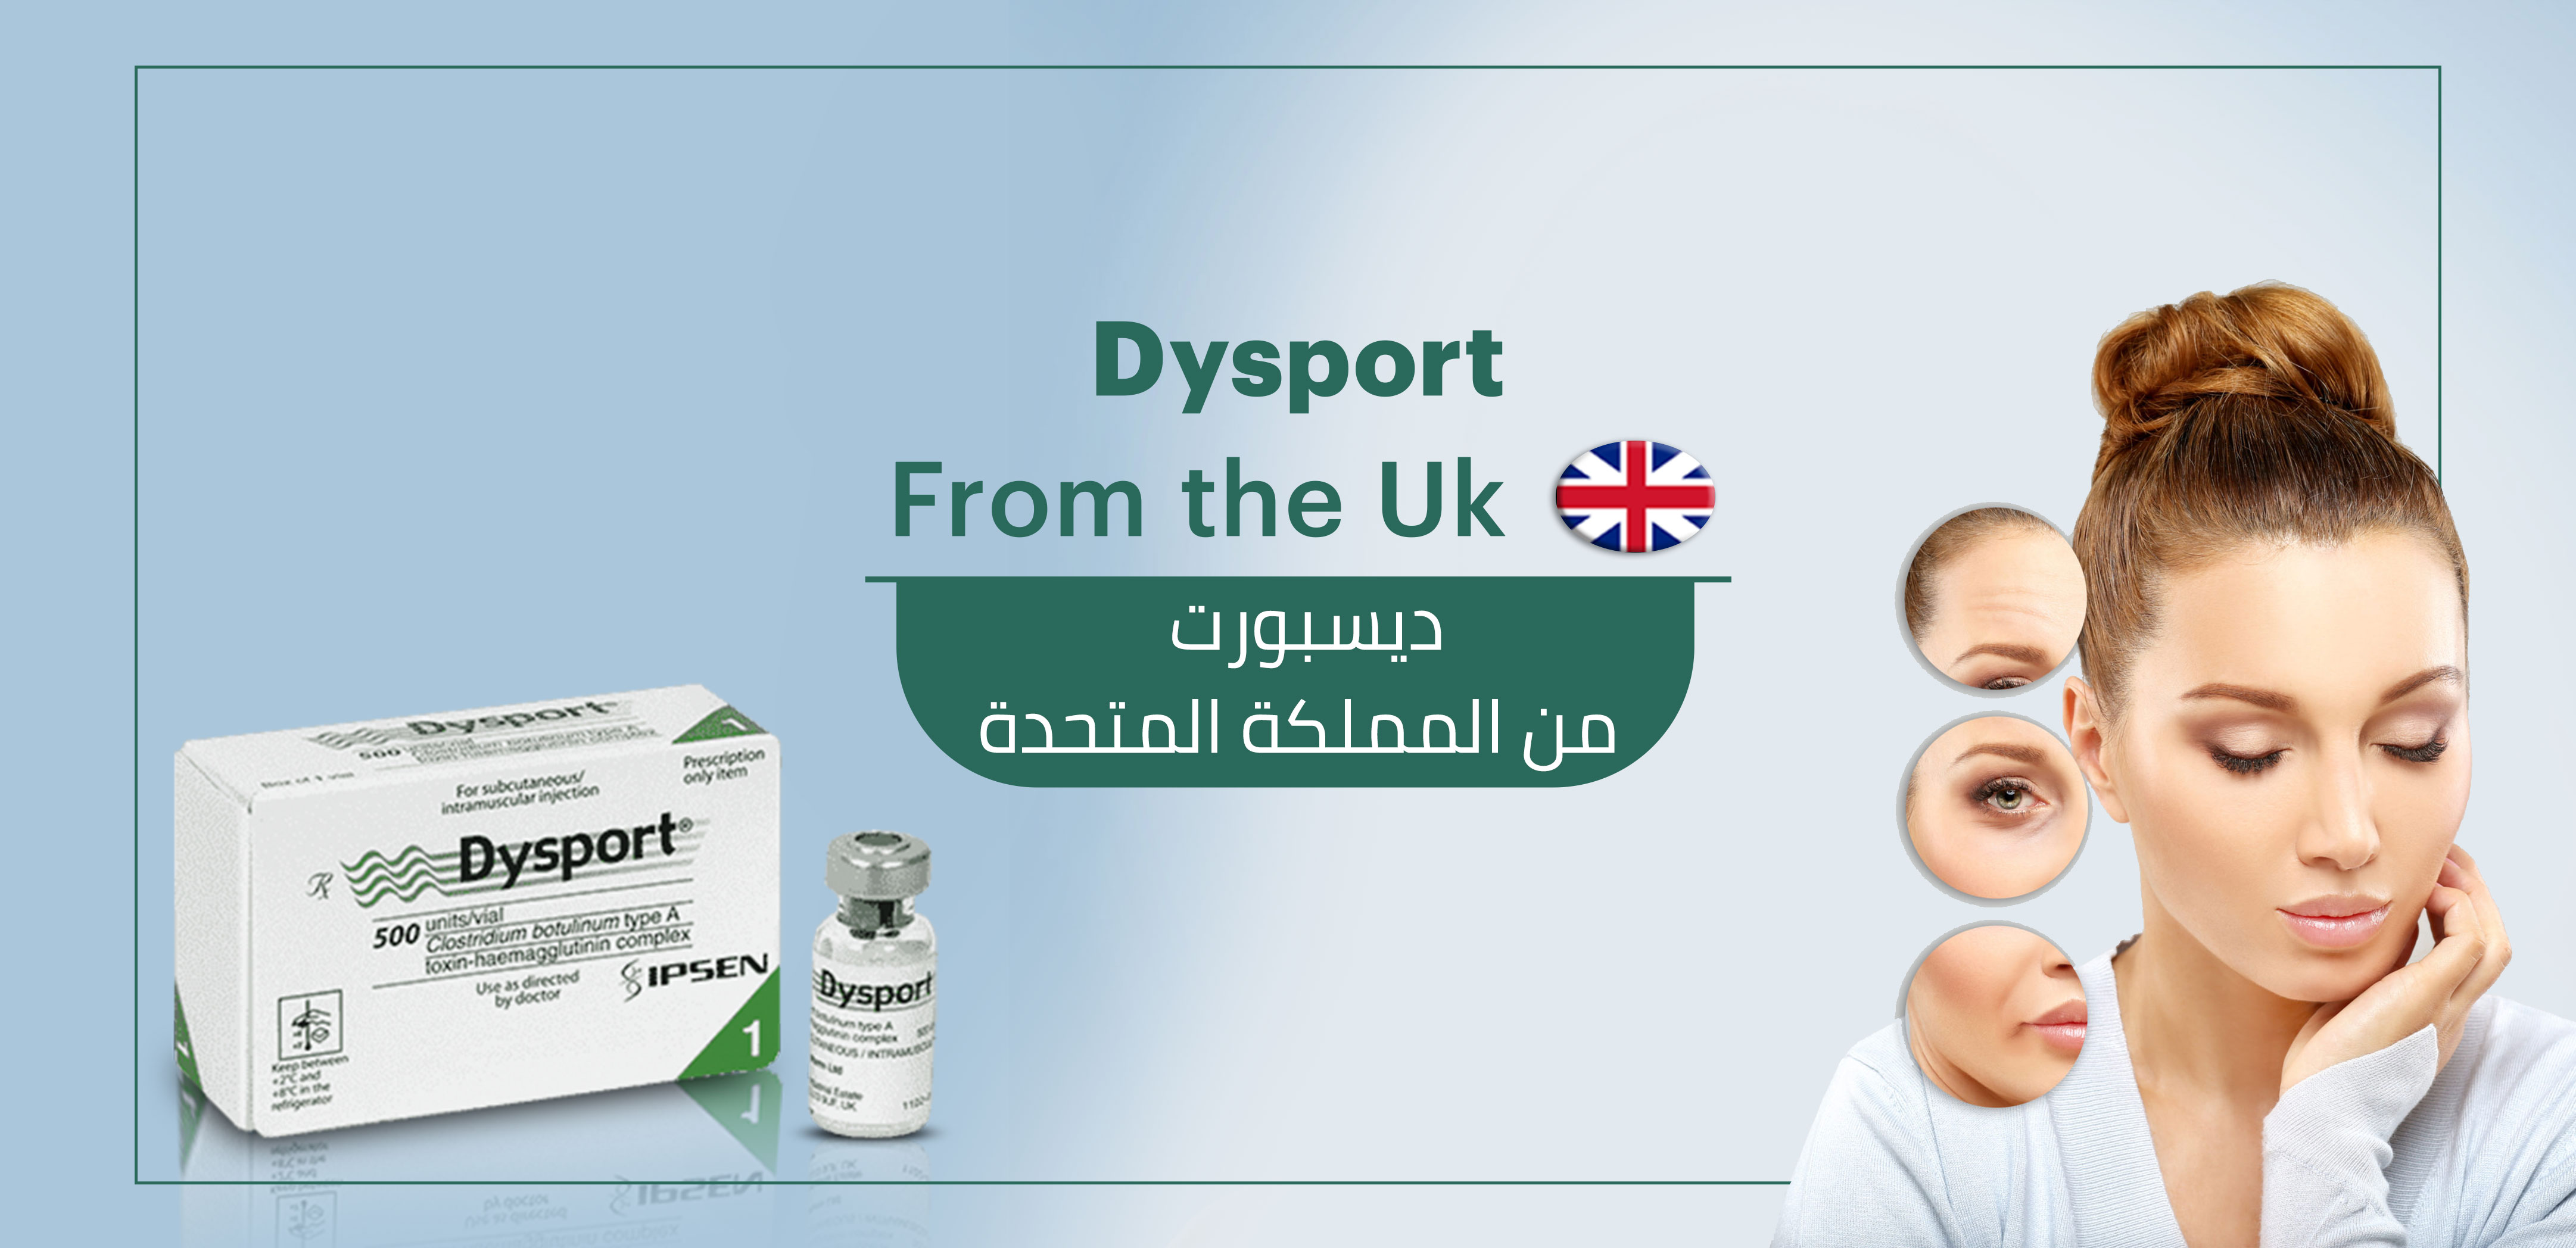 WHAT IS DYSPORT?